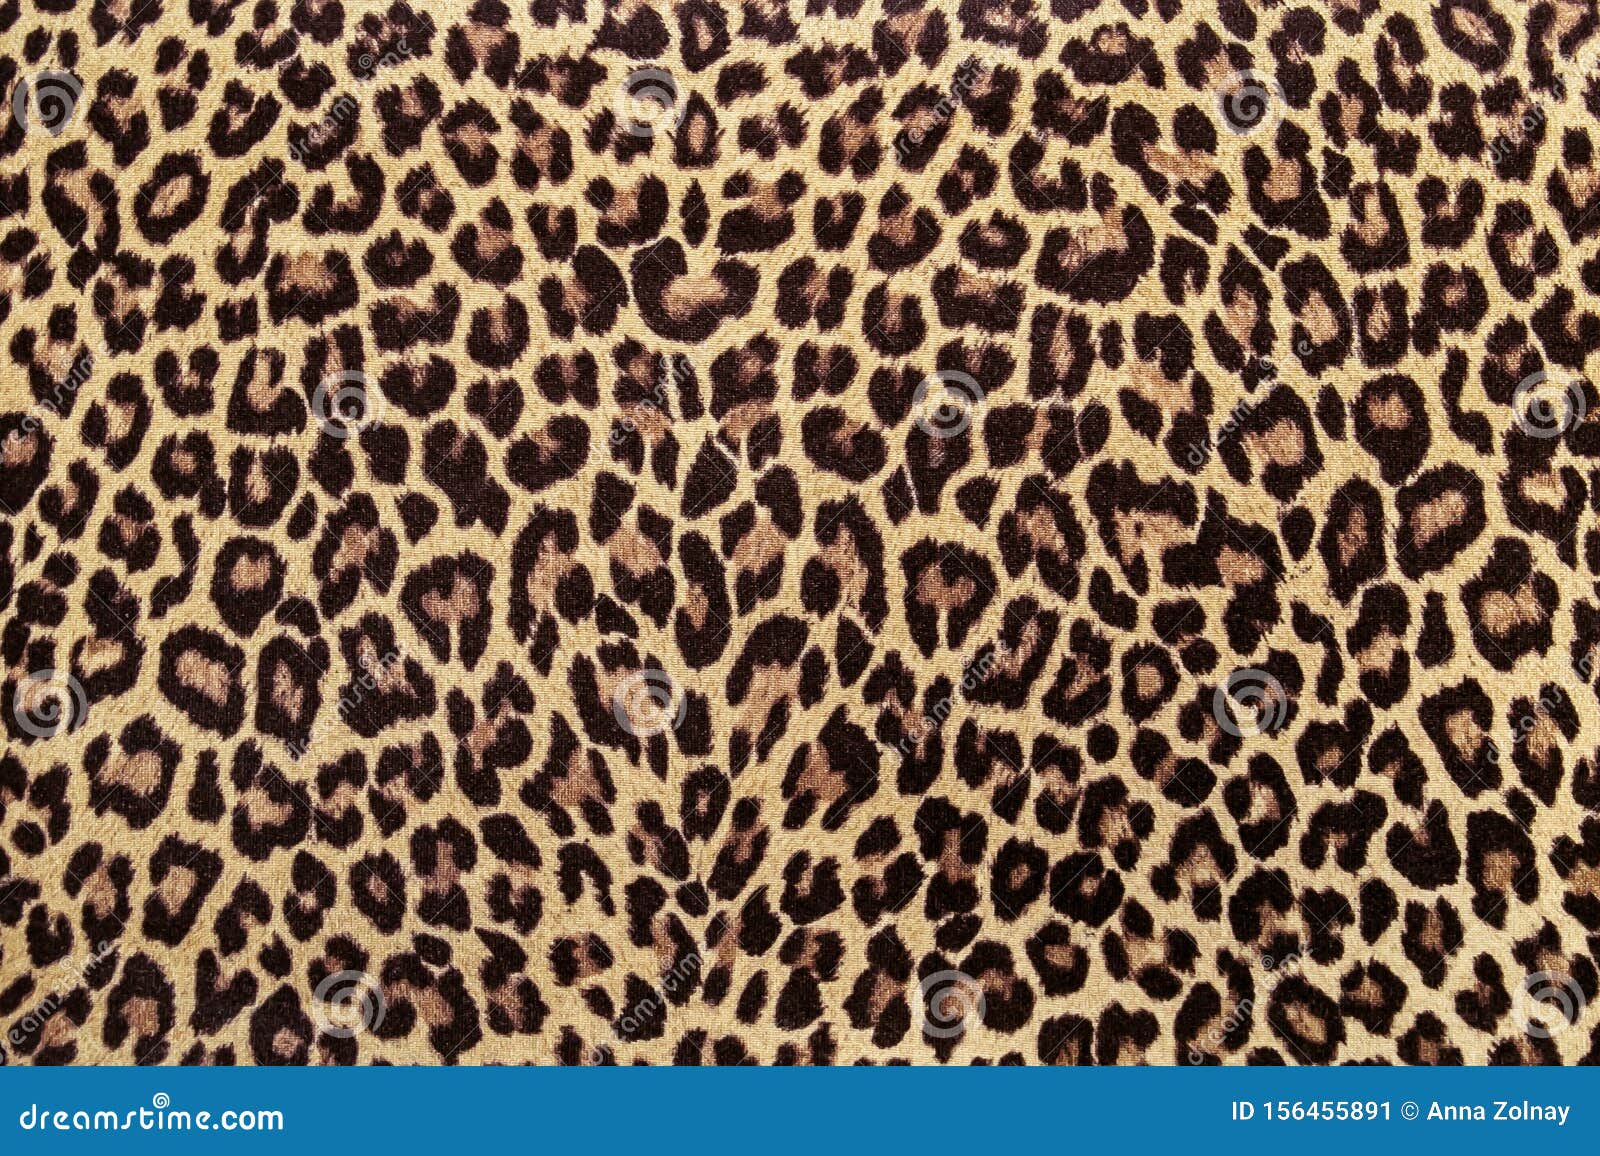 Leopard Print Fabric Pattern Wallpaper Sample. Leopard Effect, Background  Sample, Seamless Print. Stock Image - Image of camouflage, background:  156455891